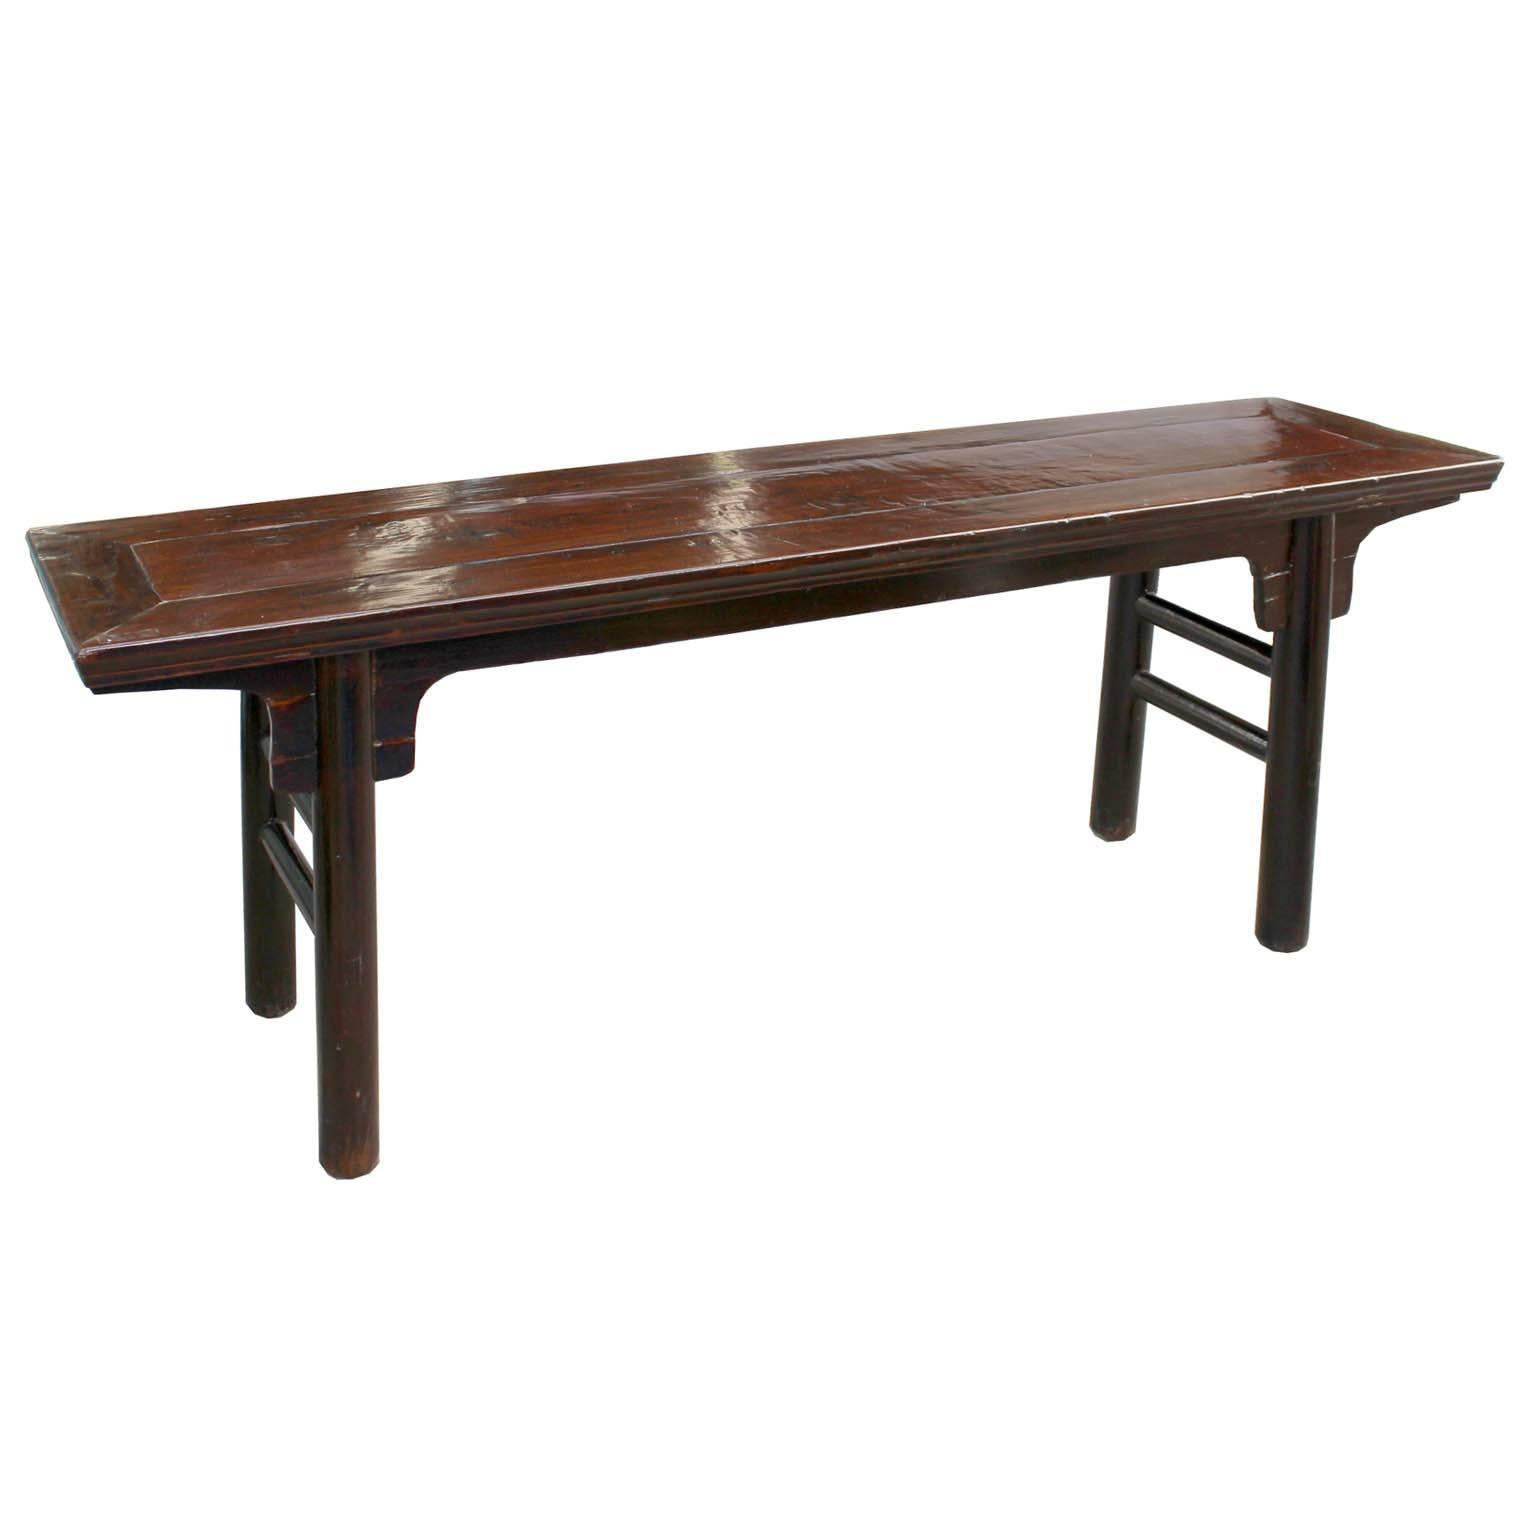 Elegant wood bench with spandrels, side supports and rounded legs. Place at the end of the bed, use as seating for a dining table, or as a coffee table in front of a sofa.